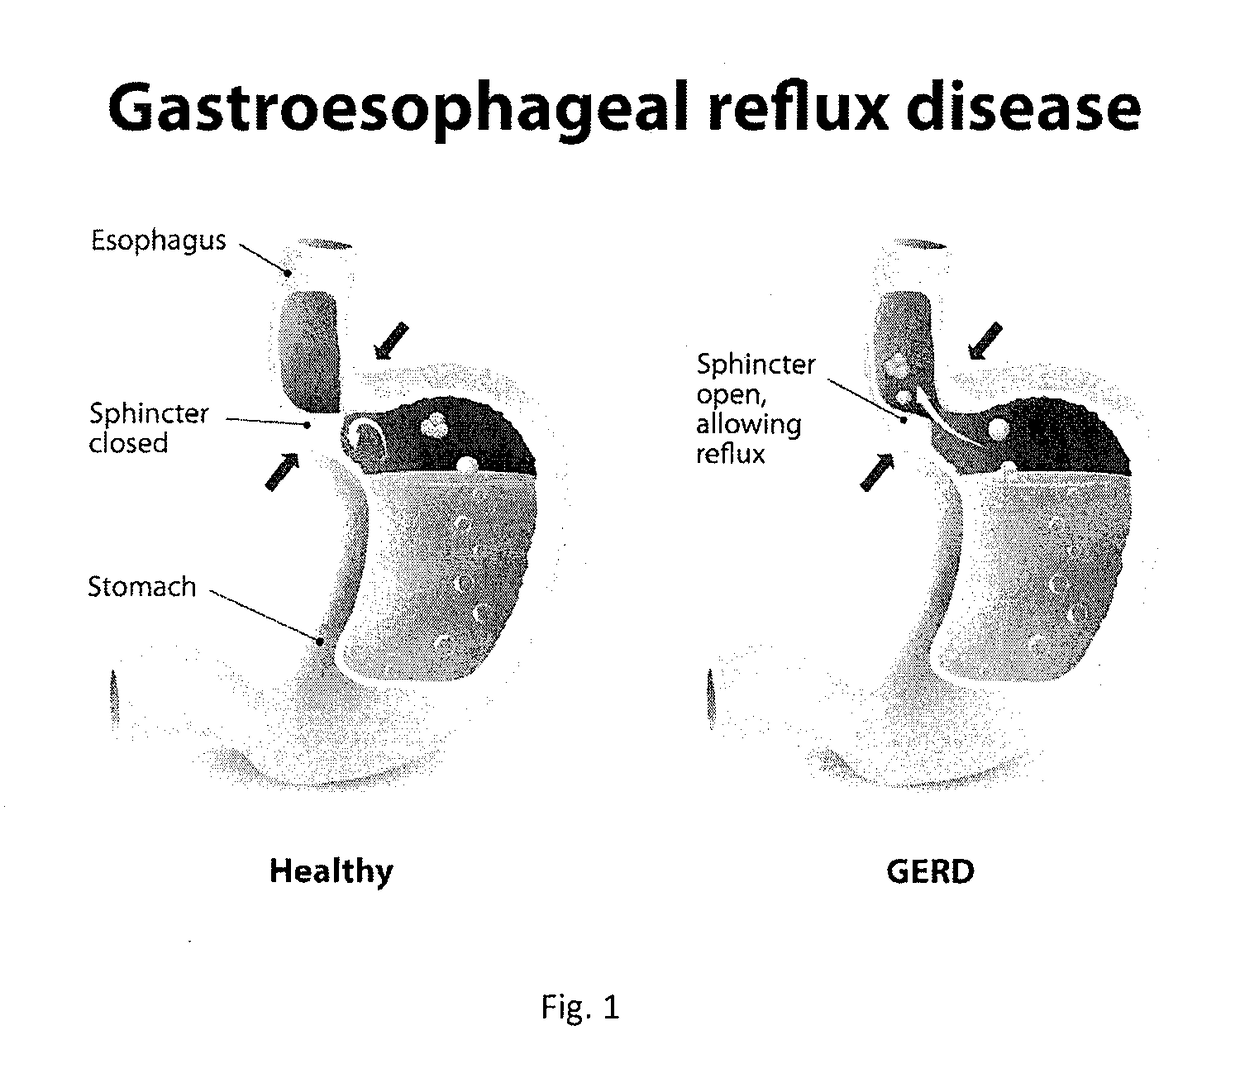 Method and System for Treating Gastro-Esophageal Reflux Disease (GERD)